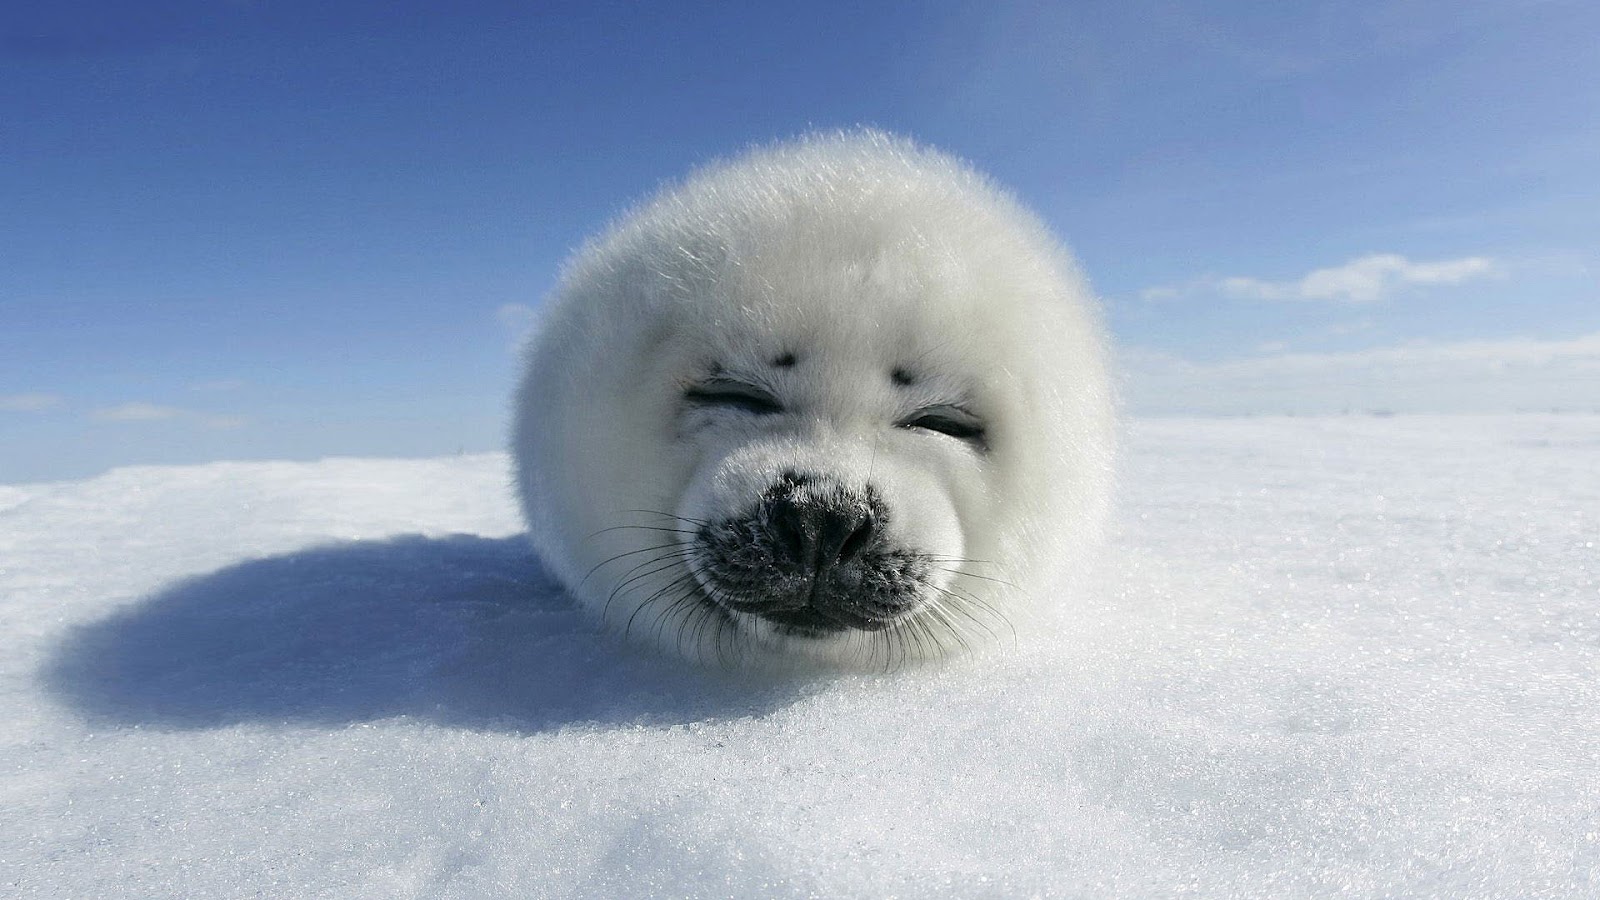  wallpaper with a baby seal resting on the snow hd seals wallpapers